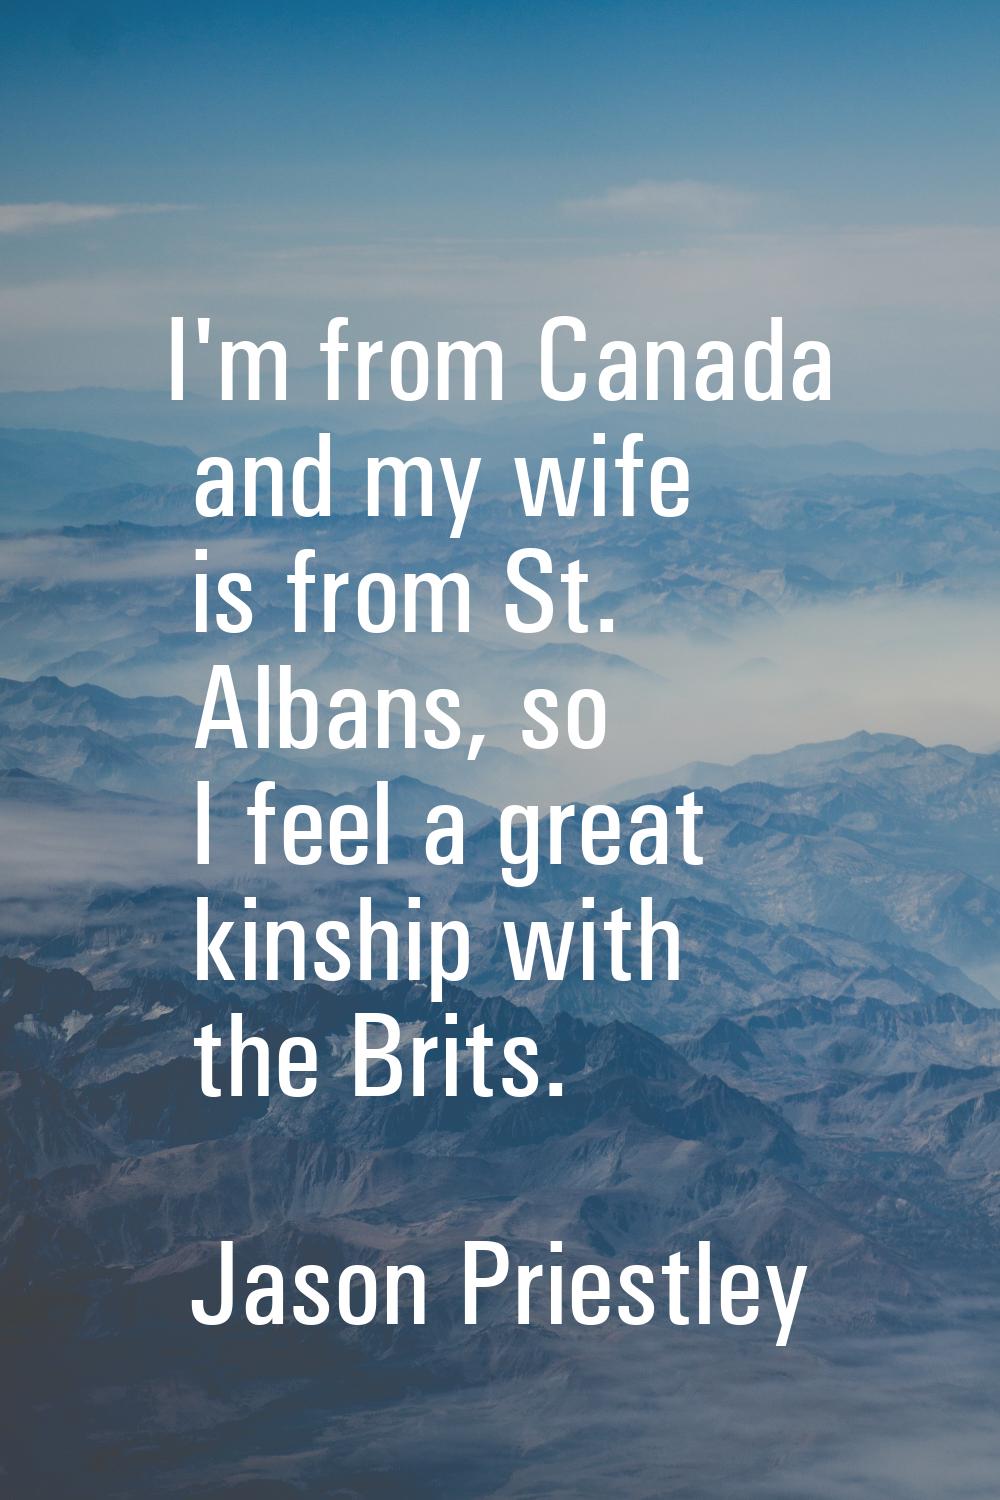 I'm from Canada and my wife is from St. Albans, so I feel a great kinship with the Brits.